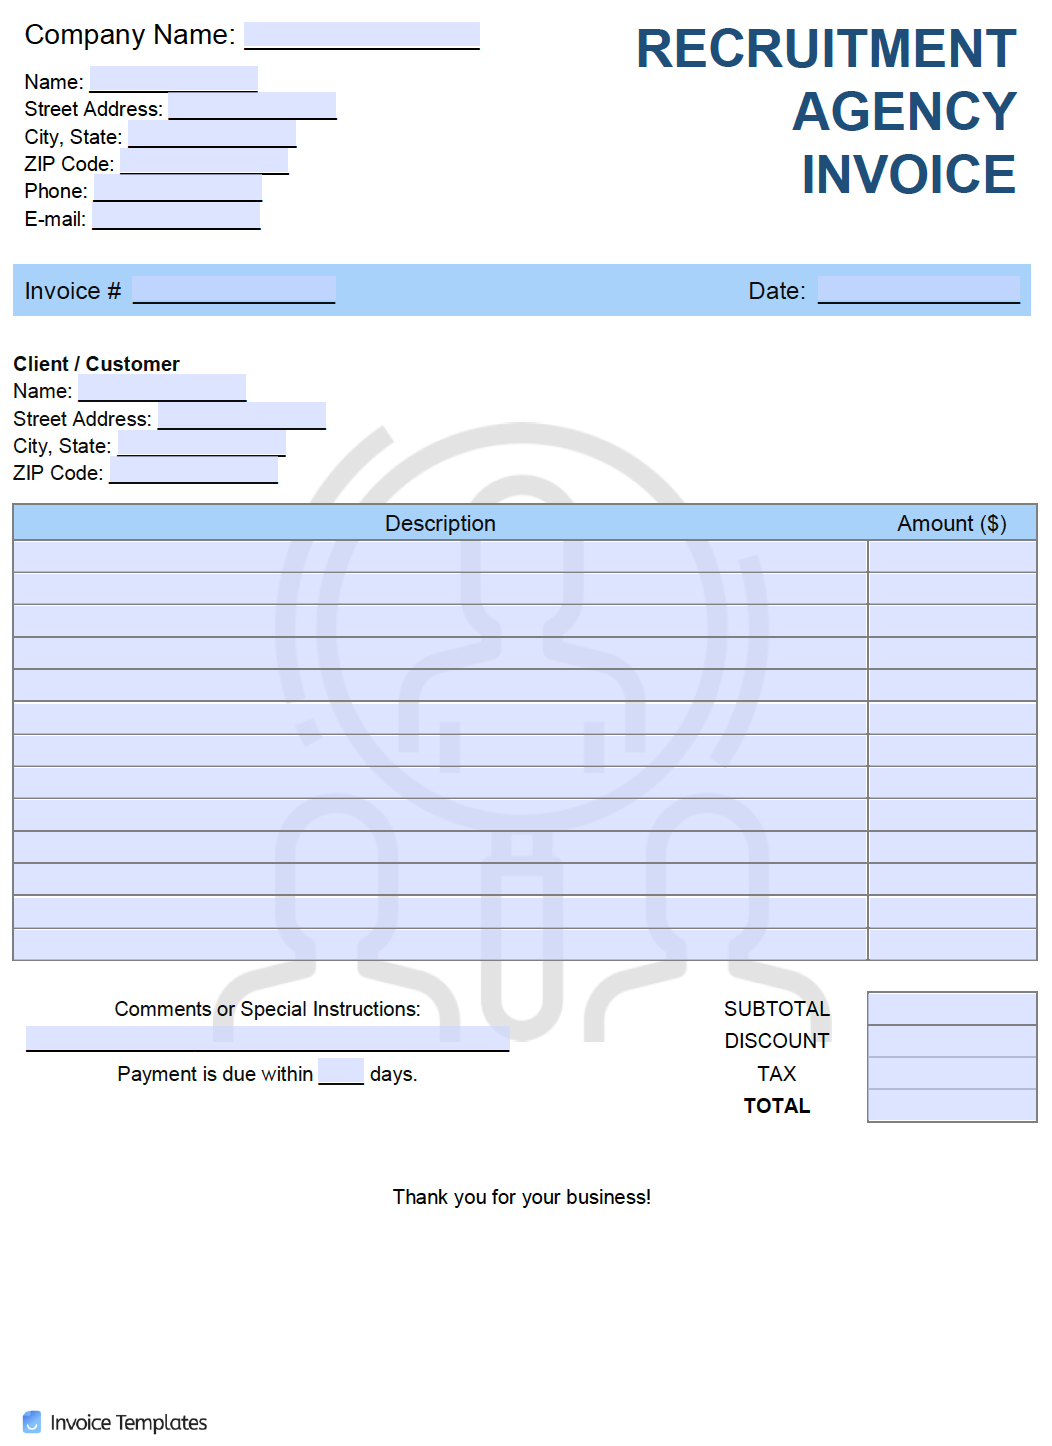 Free Recruitment Agency Invoice Template Pdf Word Excel